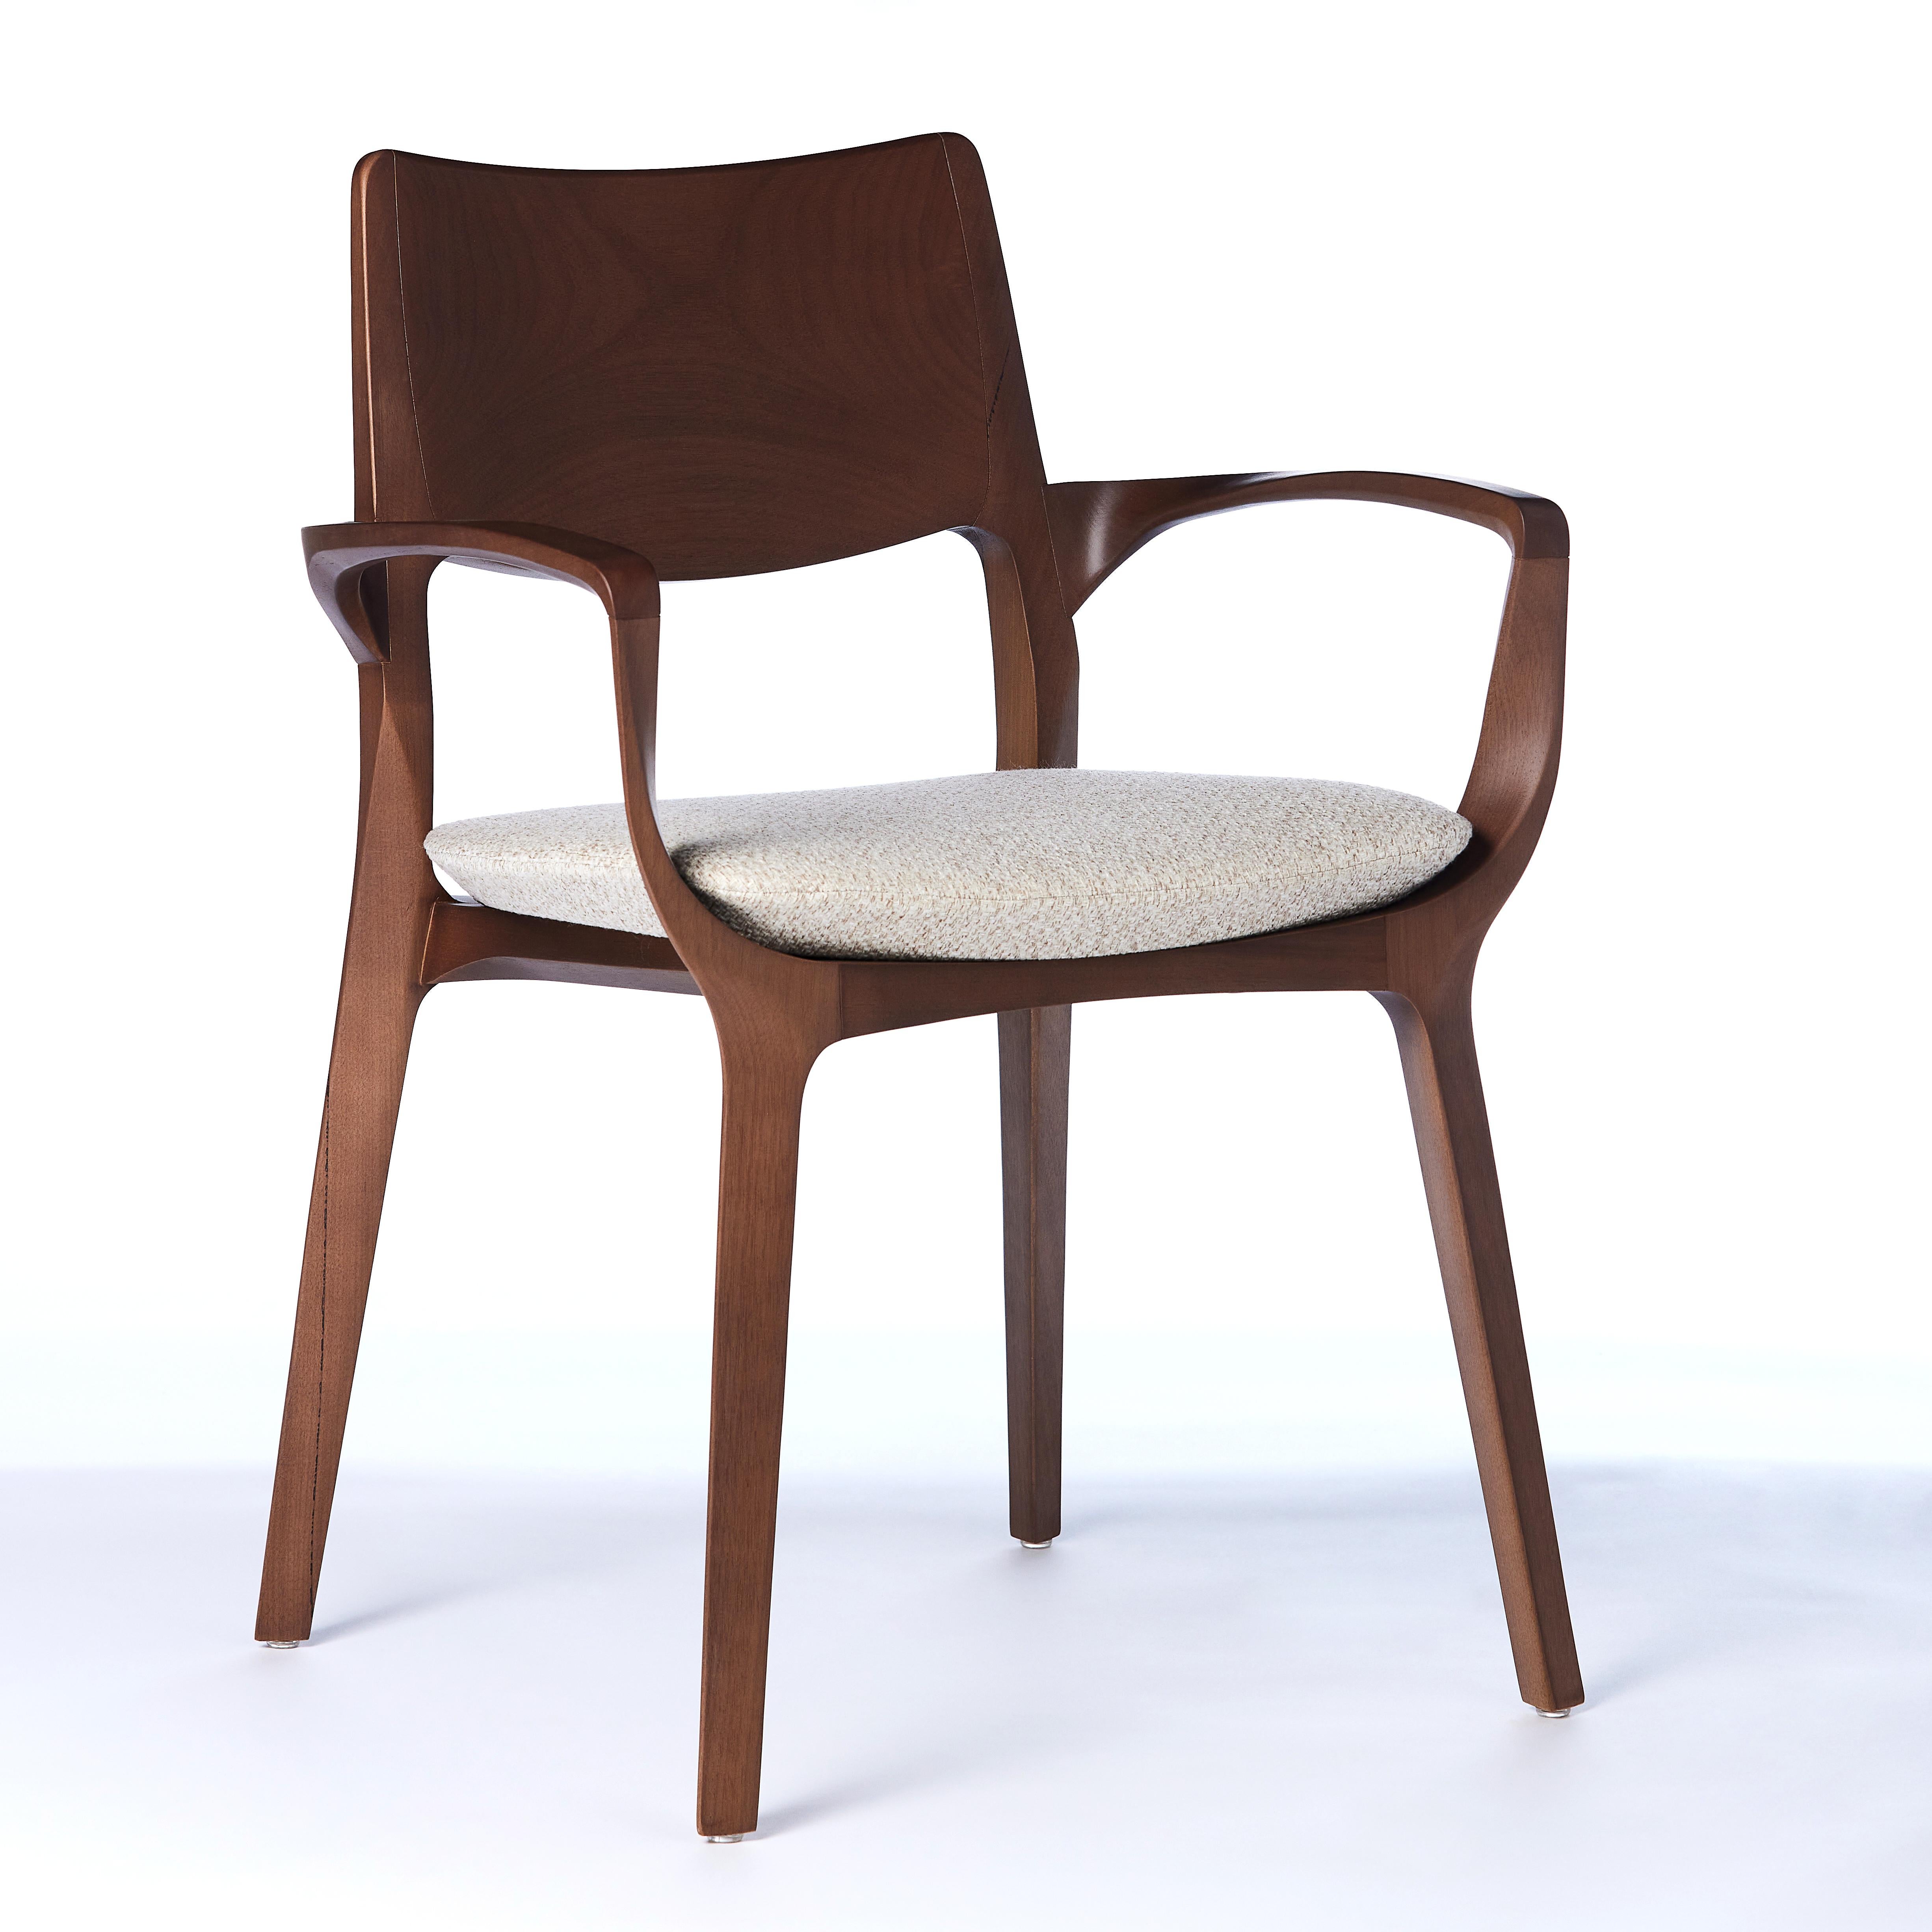 The Moderns Aurora Chair Sculptured in Walnut Finish Arms, leather seating, cane en vente 8